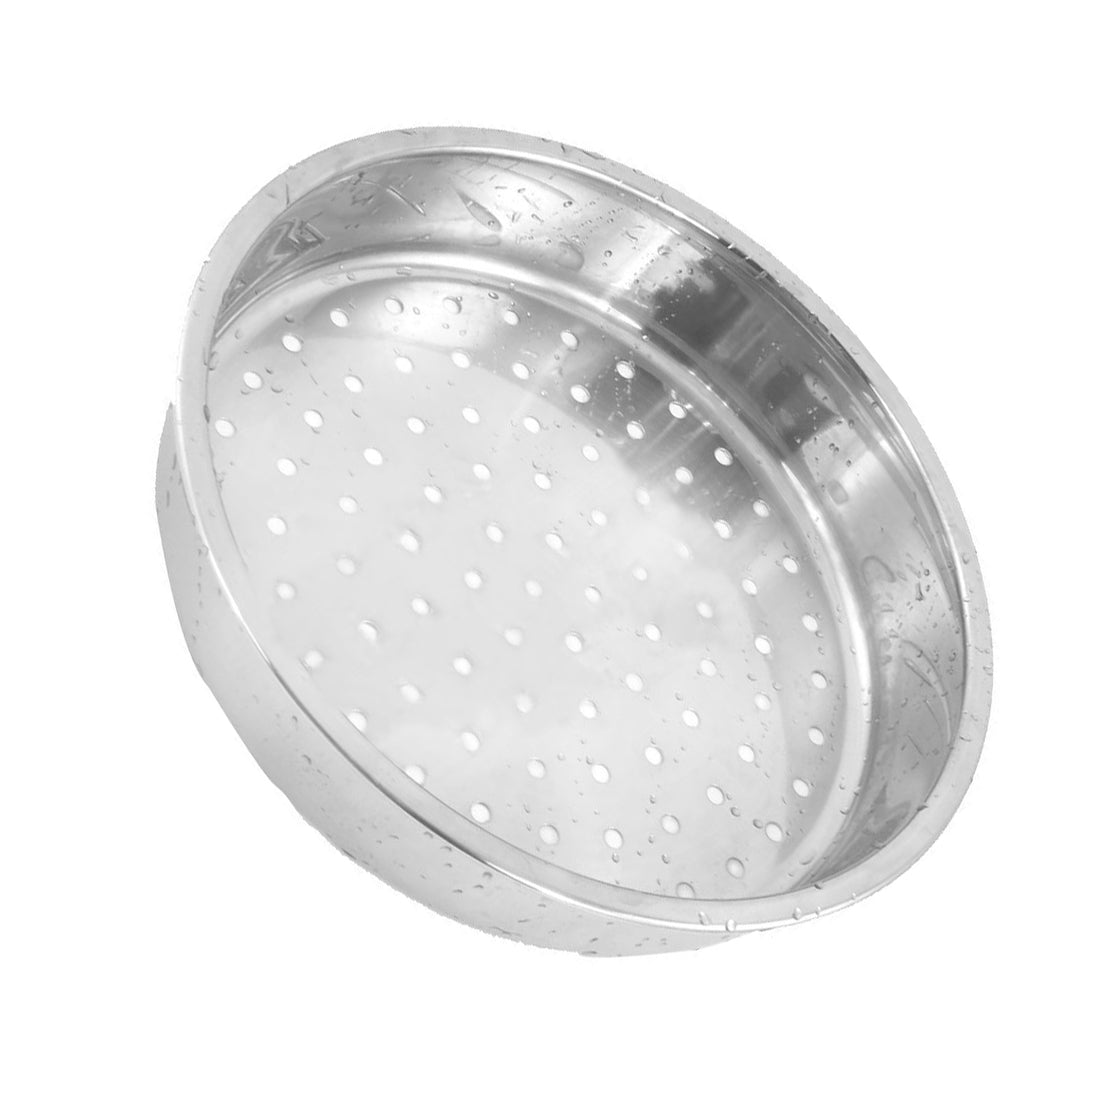 Round Stainless Steel Food Cooking Steamer